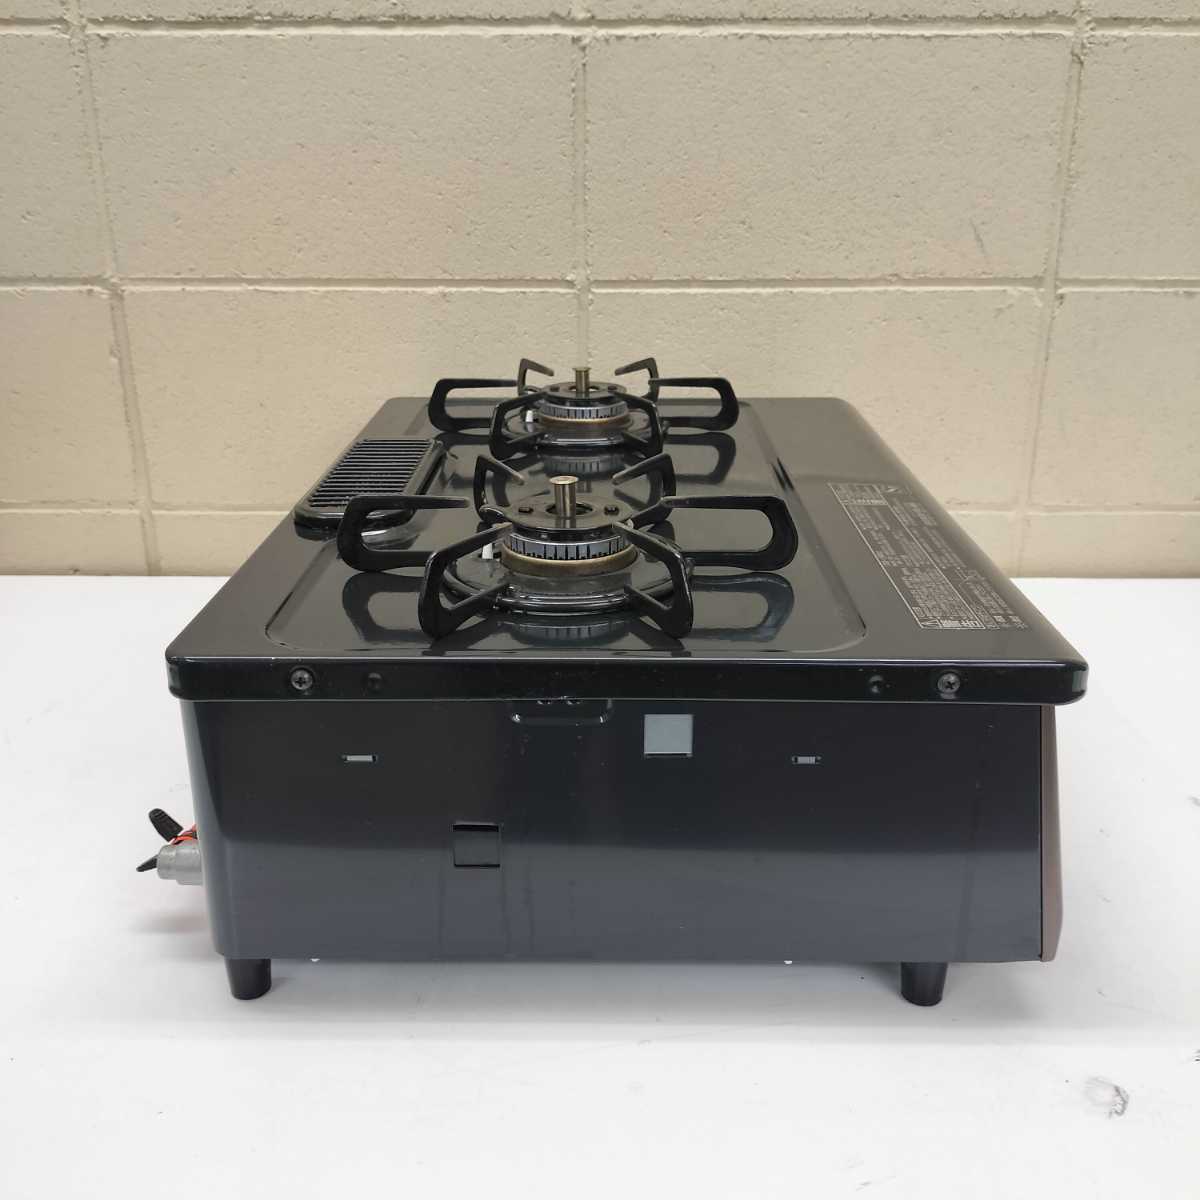 C[M-146]paromaPaloma IC-S37BM-L 2020 year made LP gas gas portable cooking stove gas-stove 2.